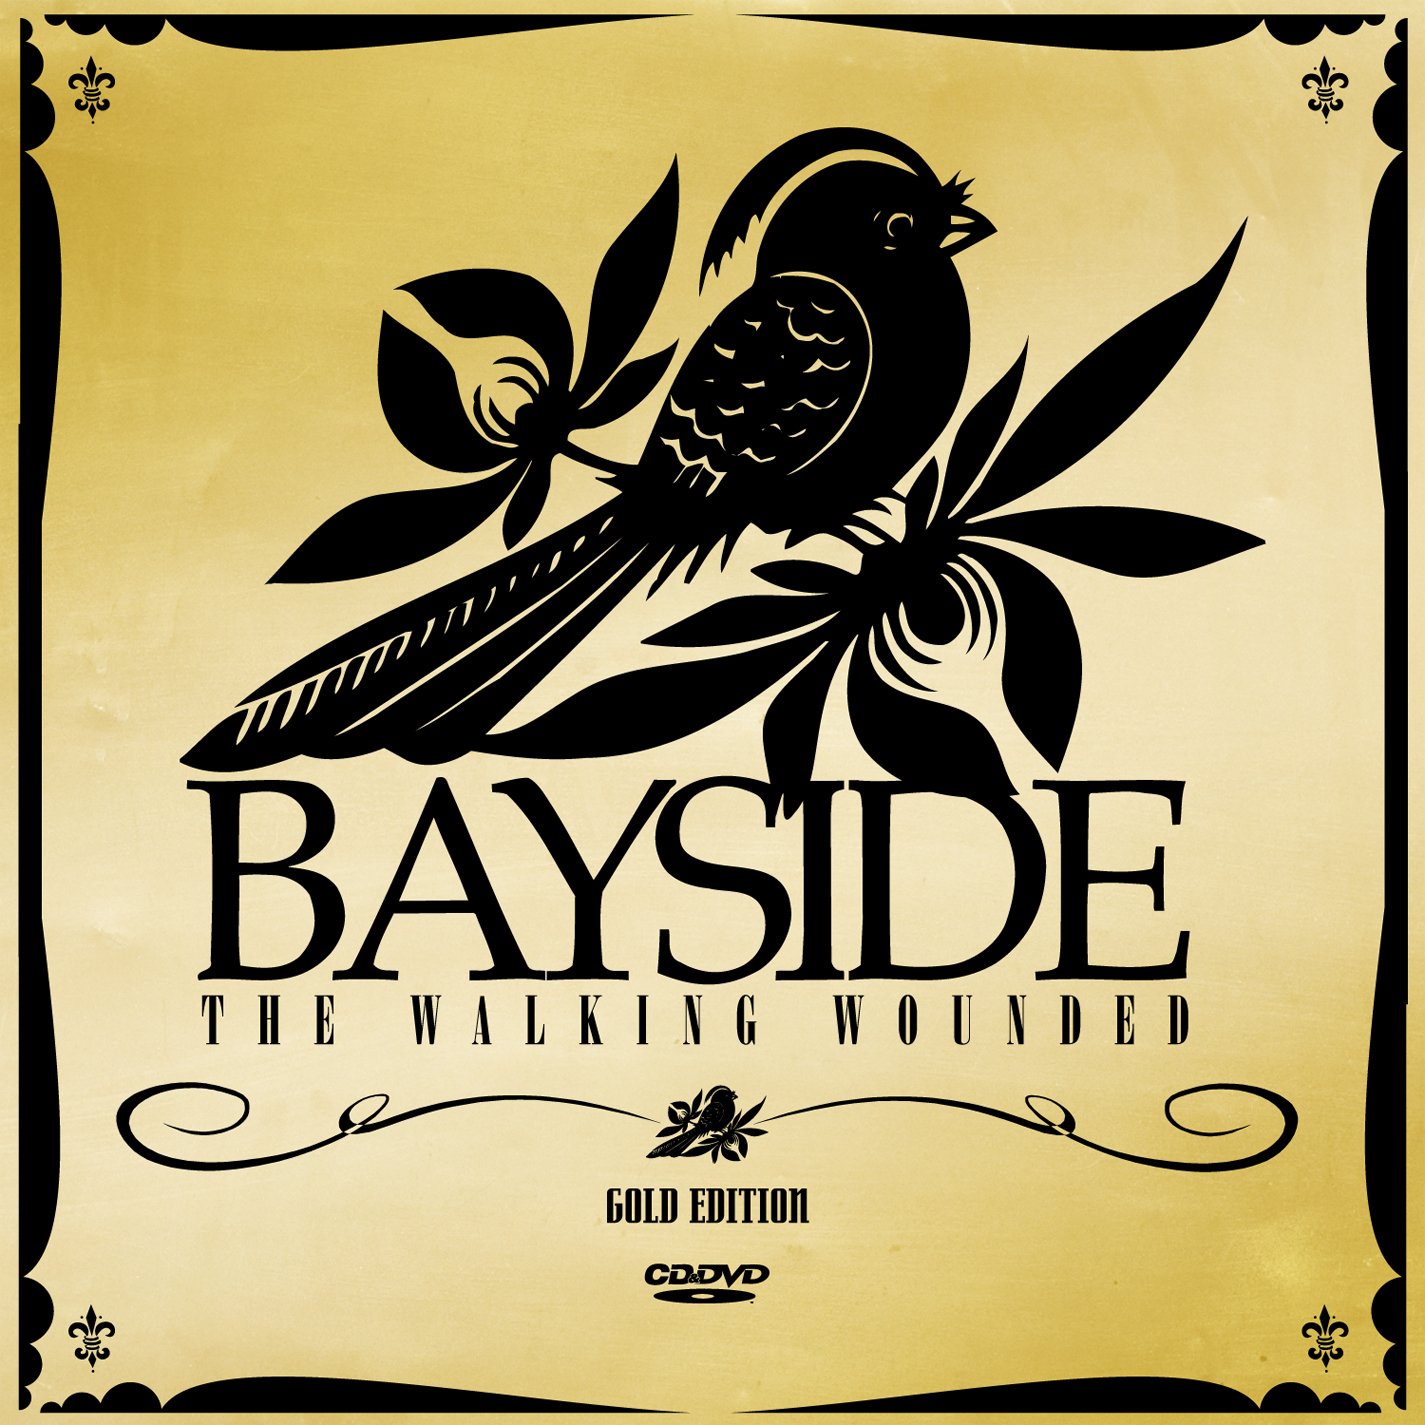 Bayside The Walking Wounded Rar File